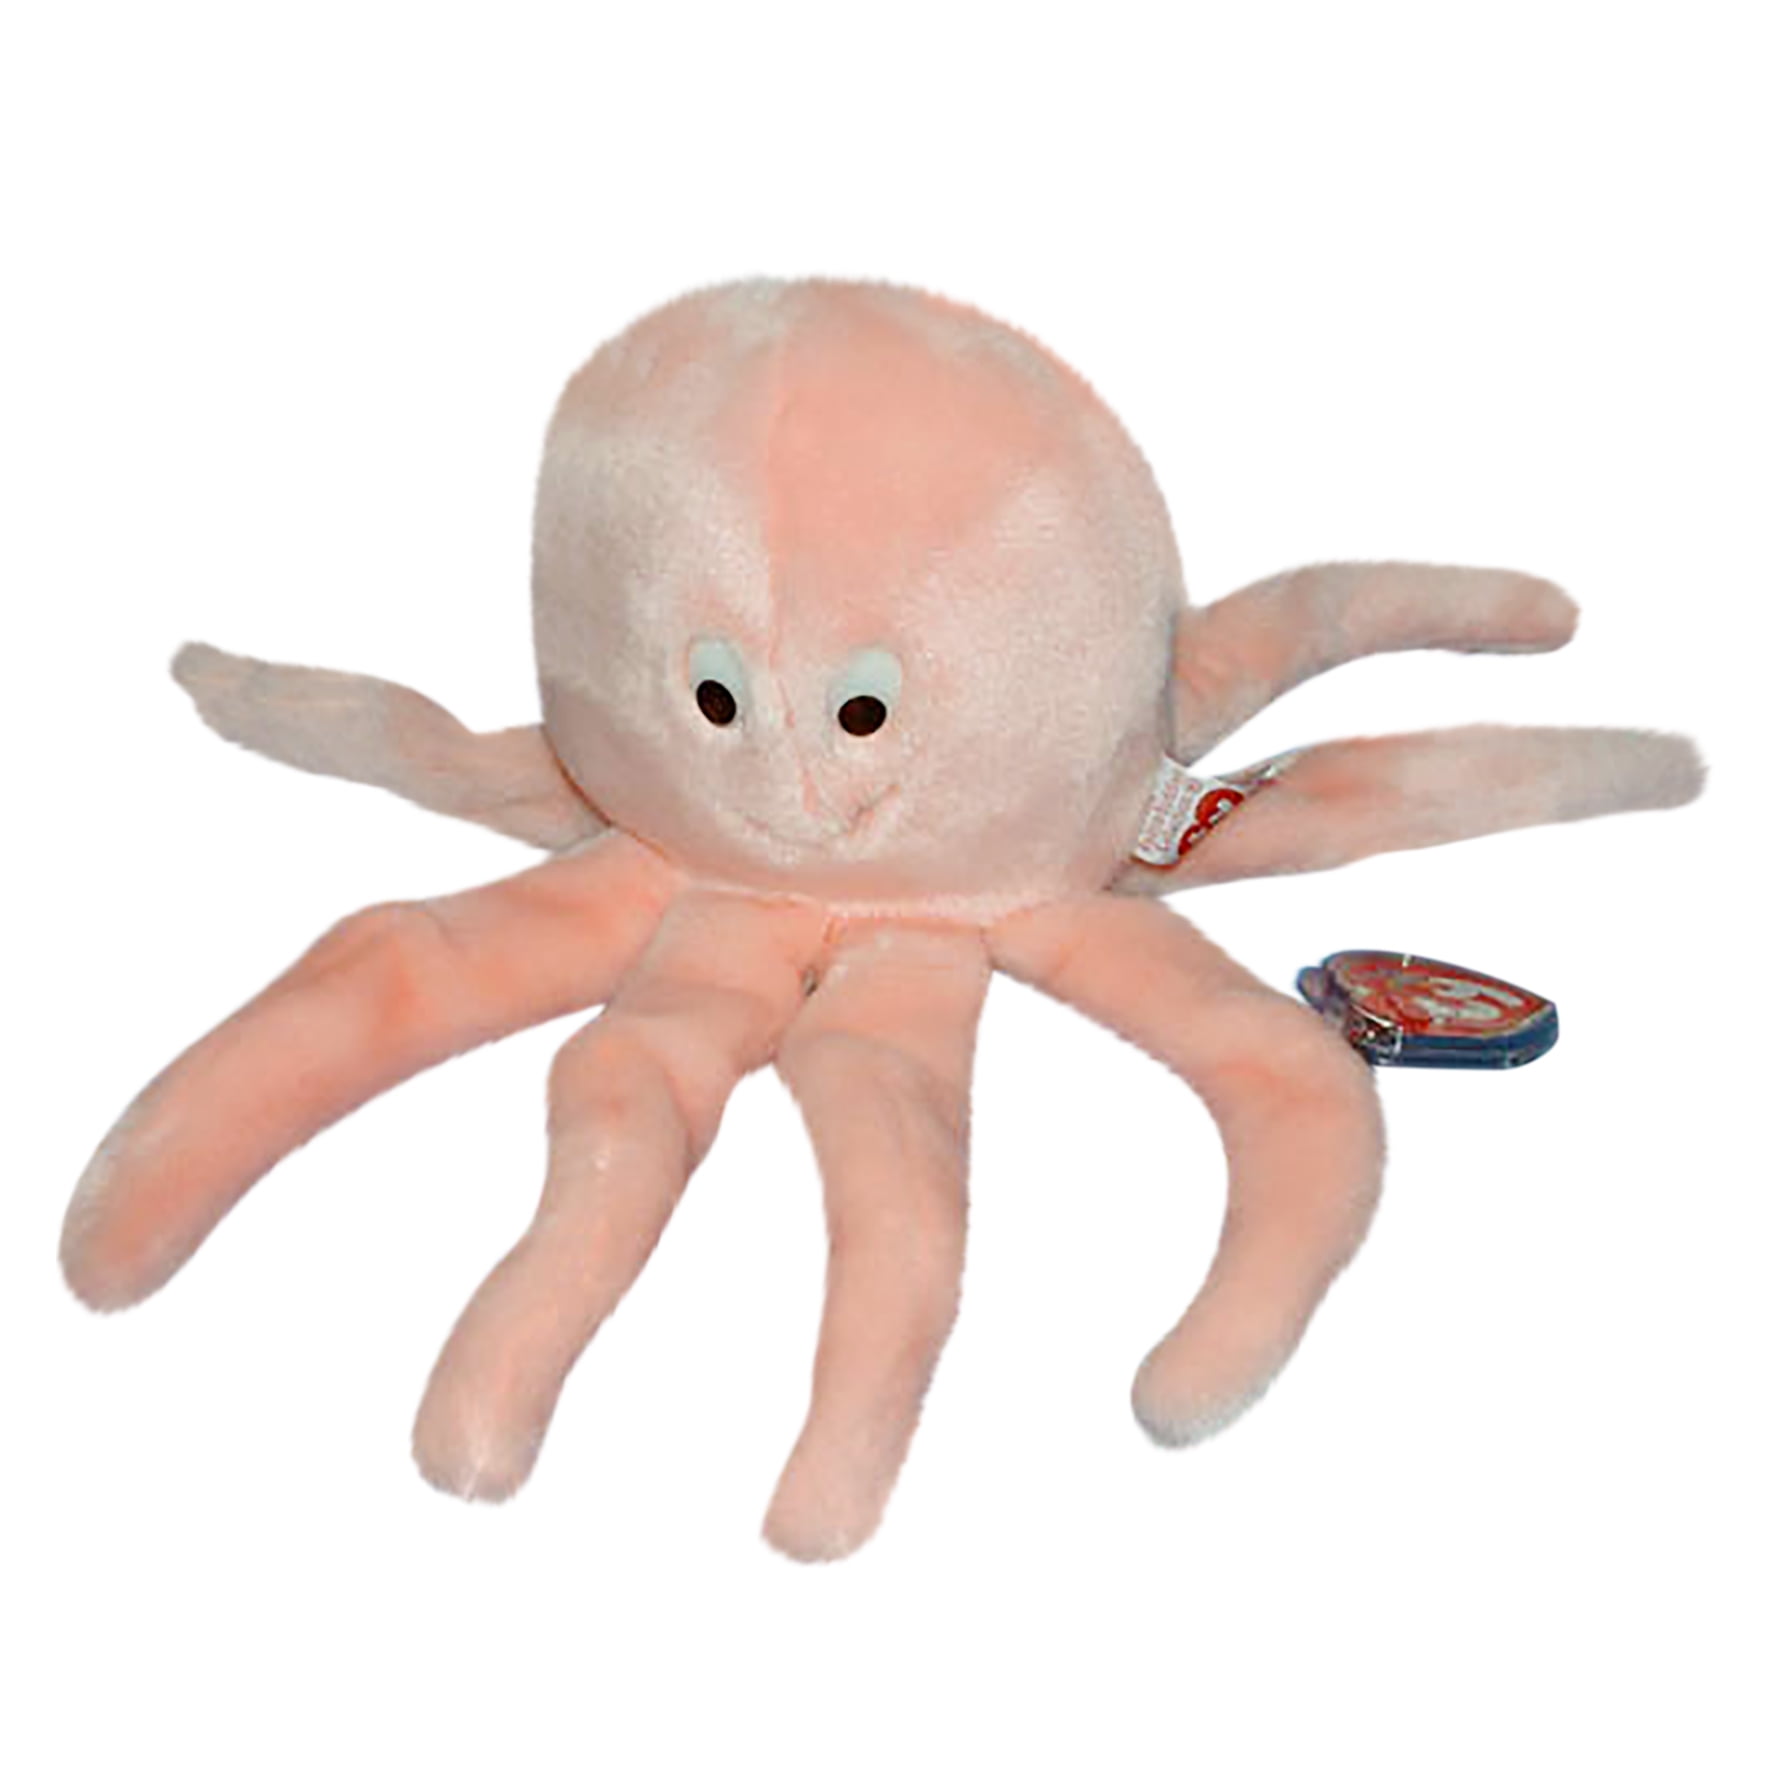 Ty Inky The Octopus Beanie Baby for sale online 